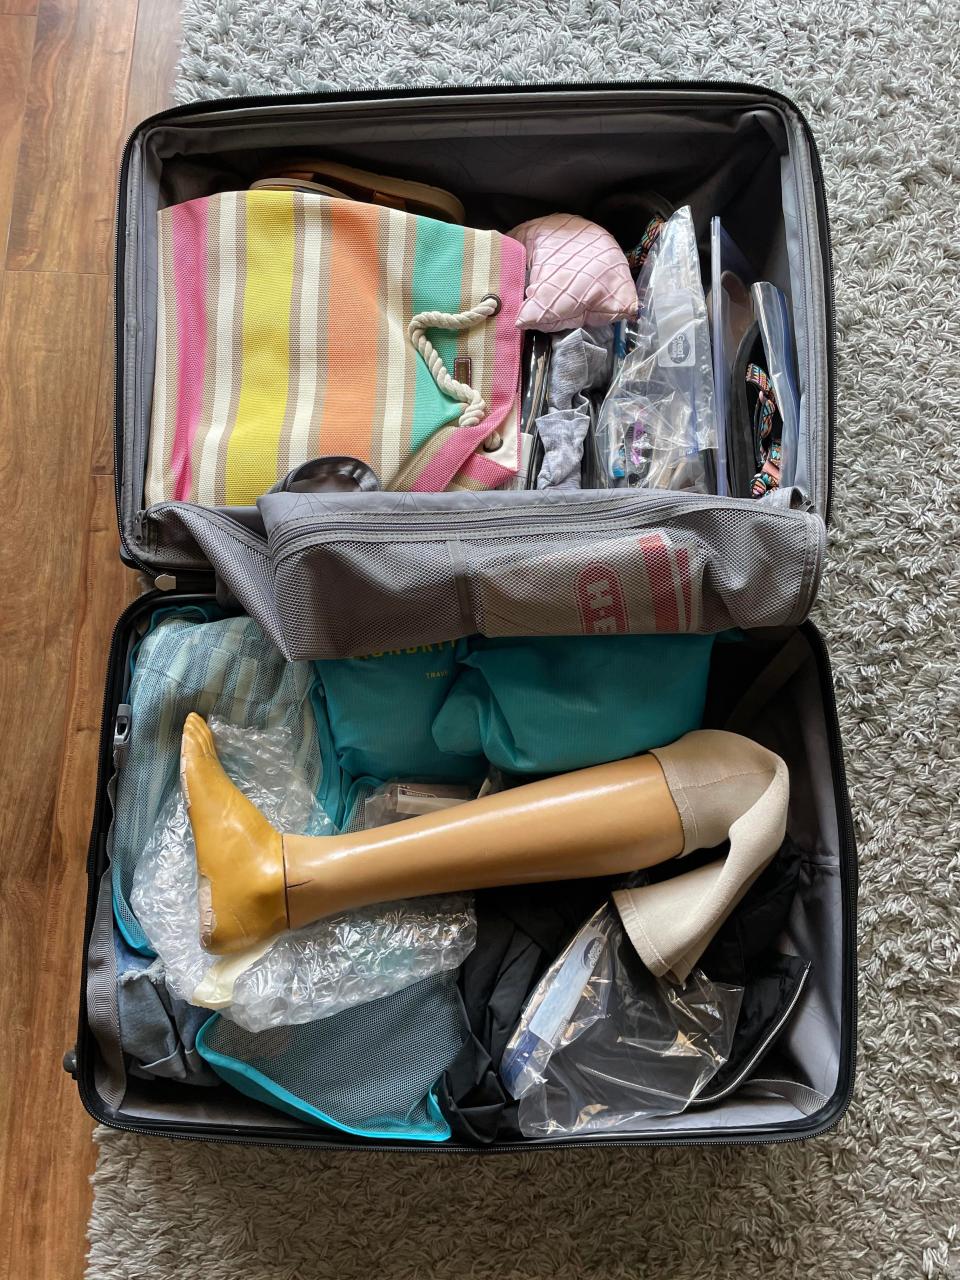 Emily Tuite packed her custom prosthetic leg in a blue suitcase for her trip to San Diego.